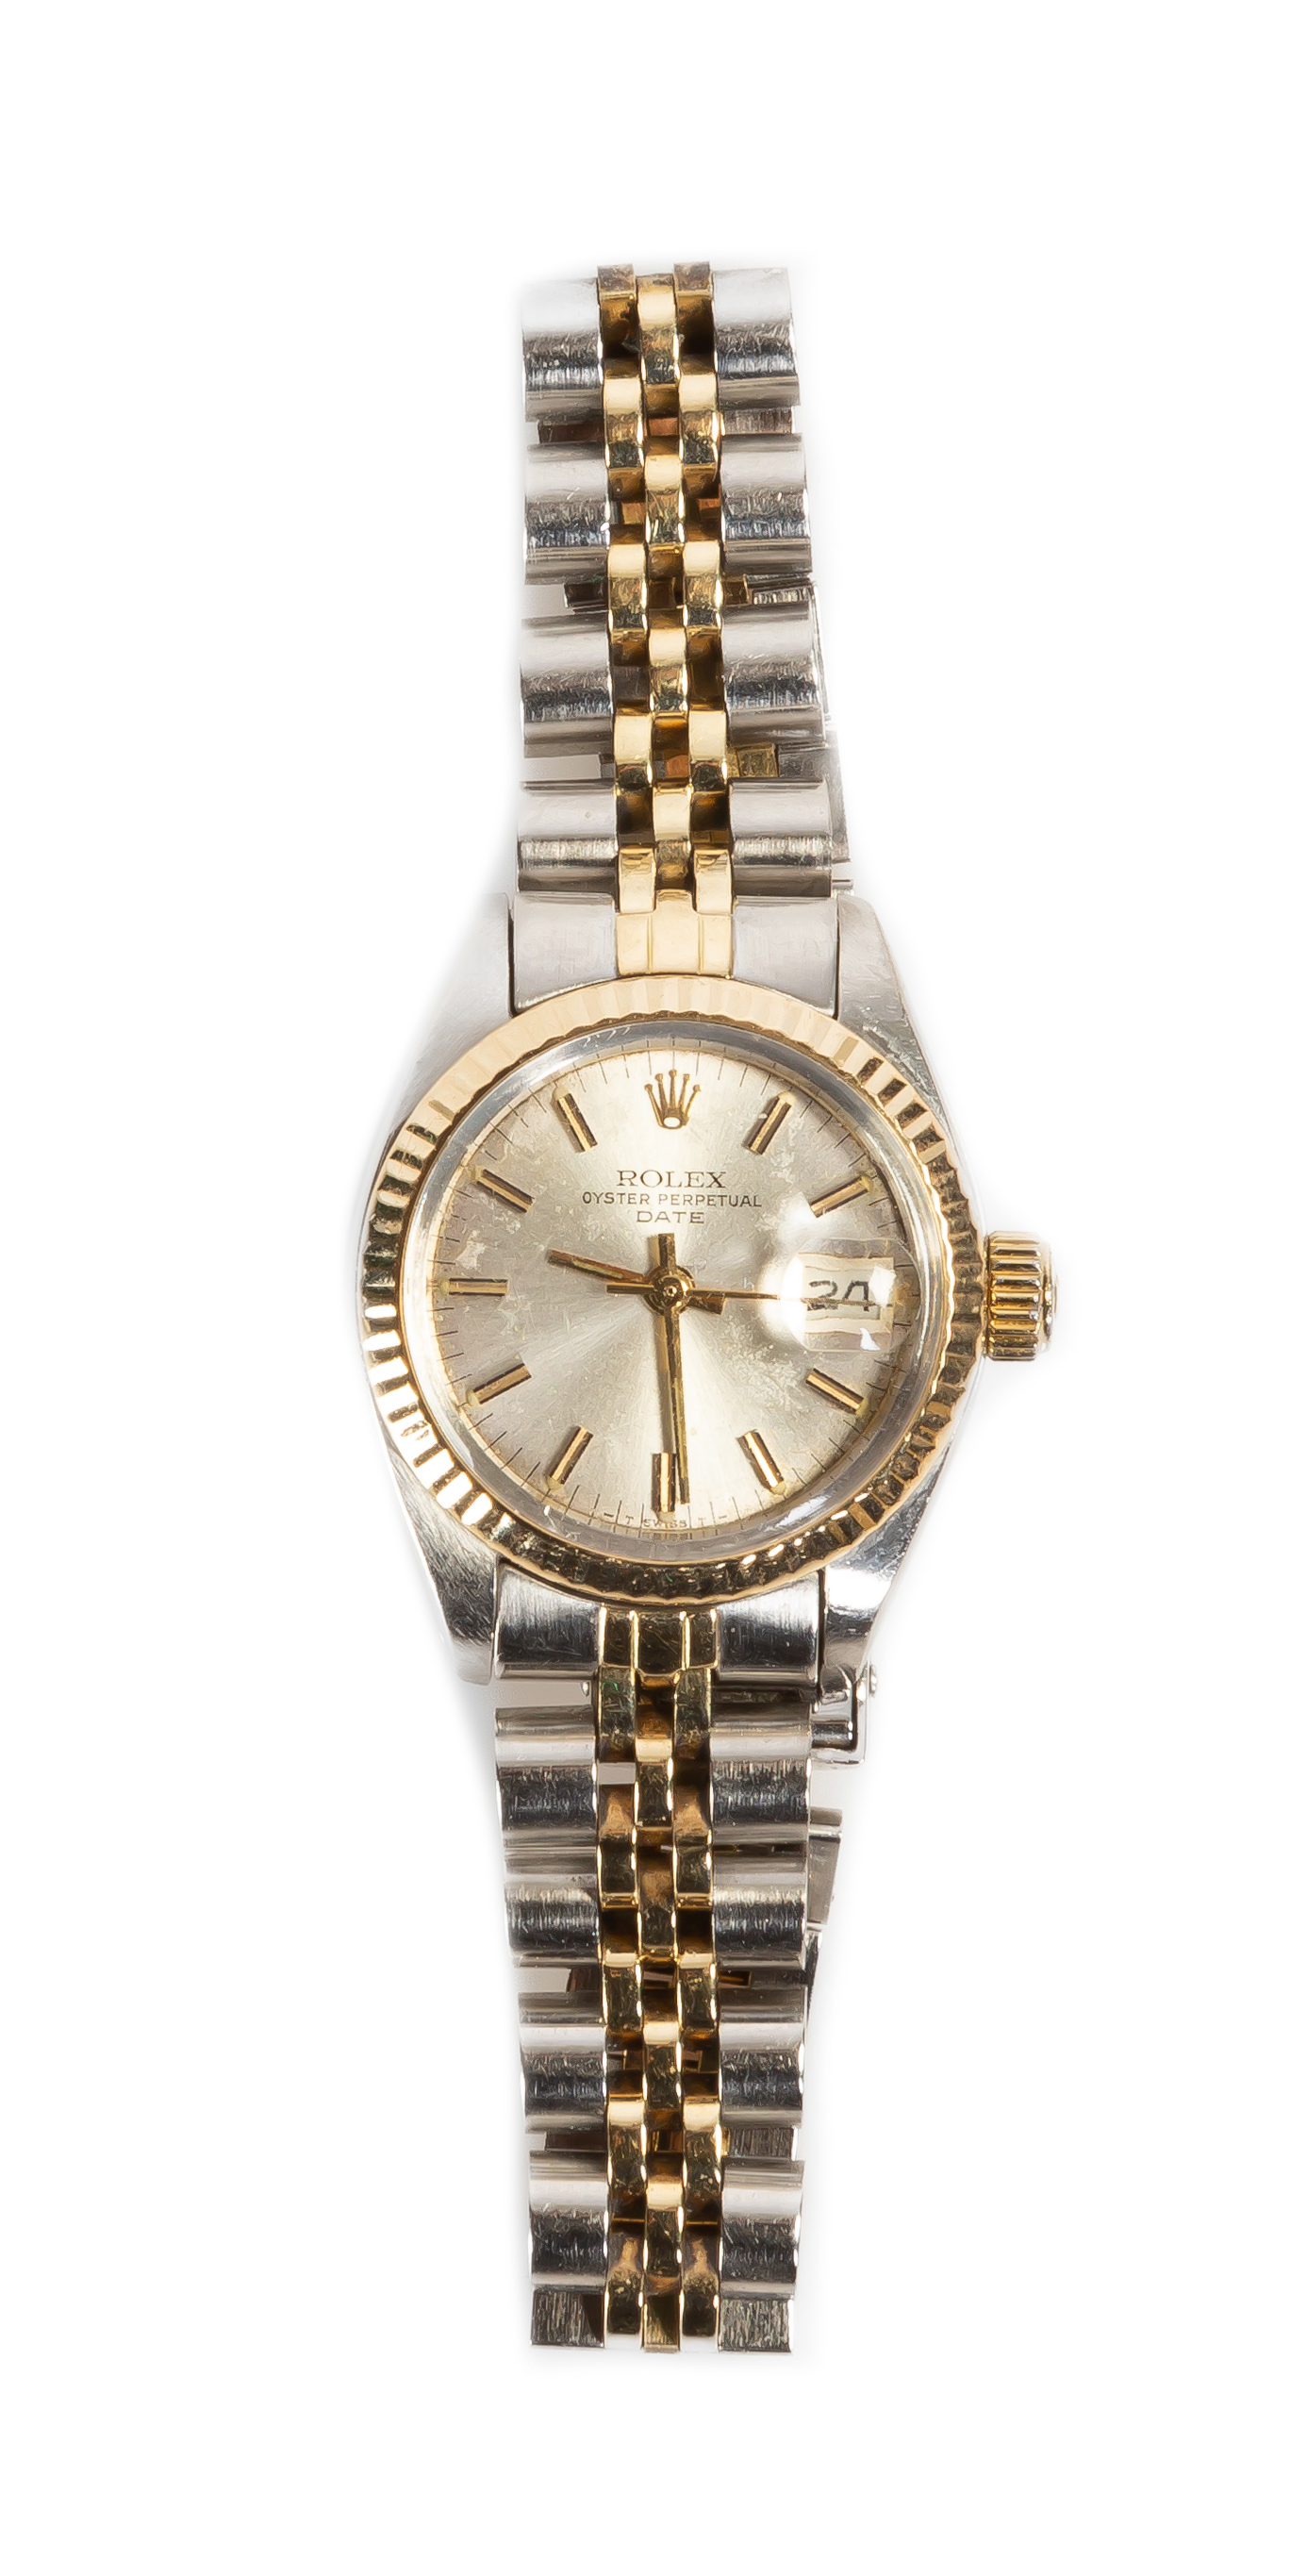 LADYS ROLEX OYSTER PERPETUAL DATEJUST